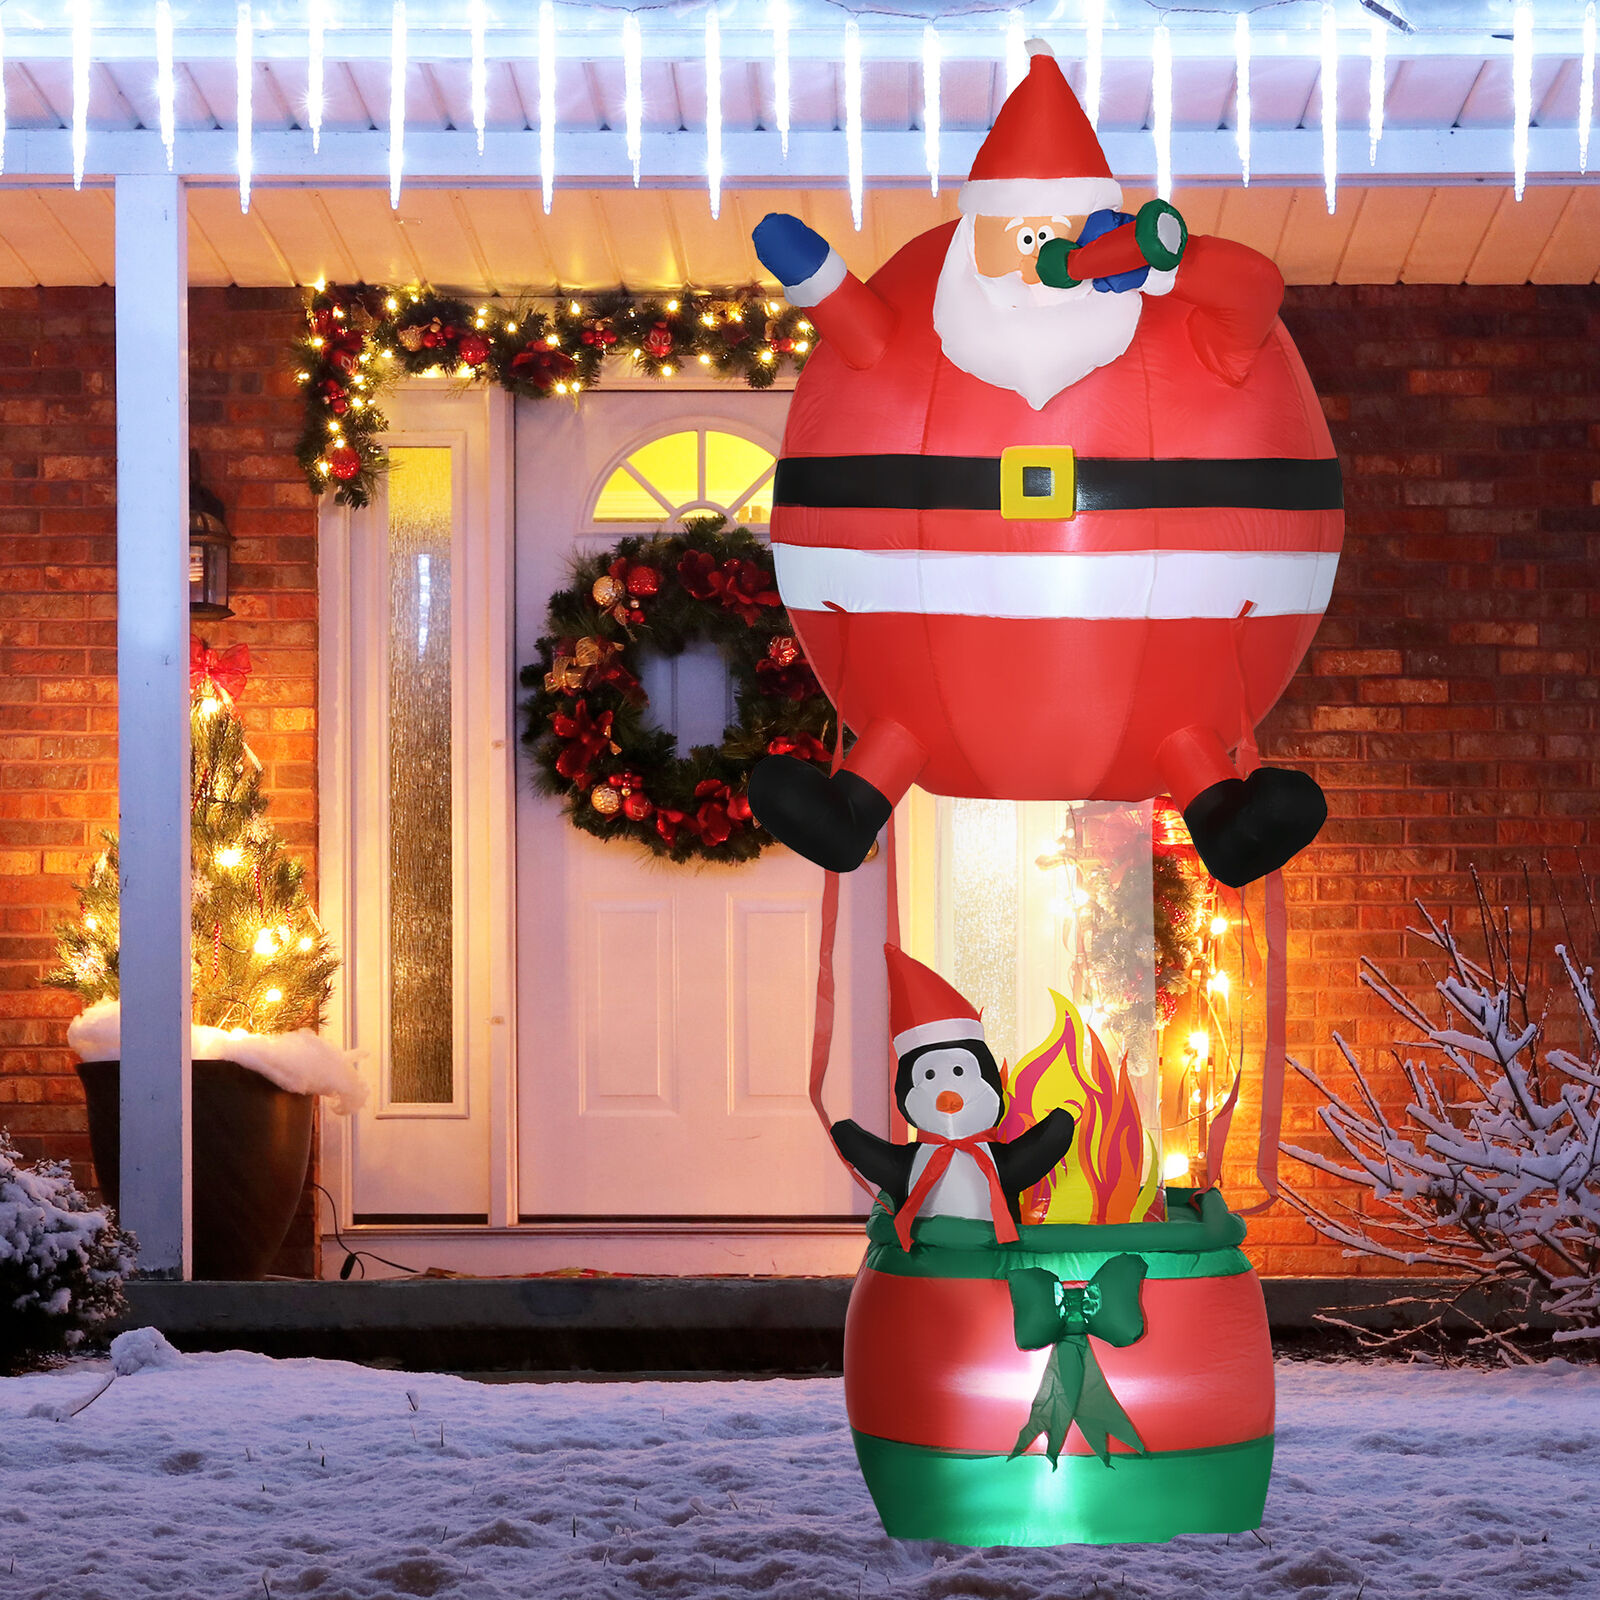 8ft Inflatable Santa Claus Hot Air Balloon with Penguin LED Display